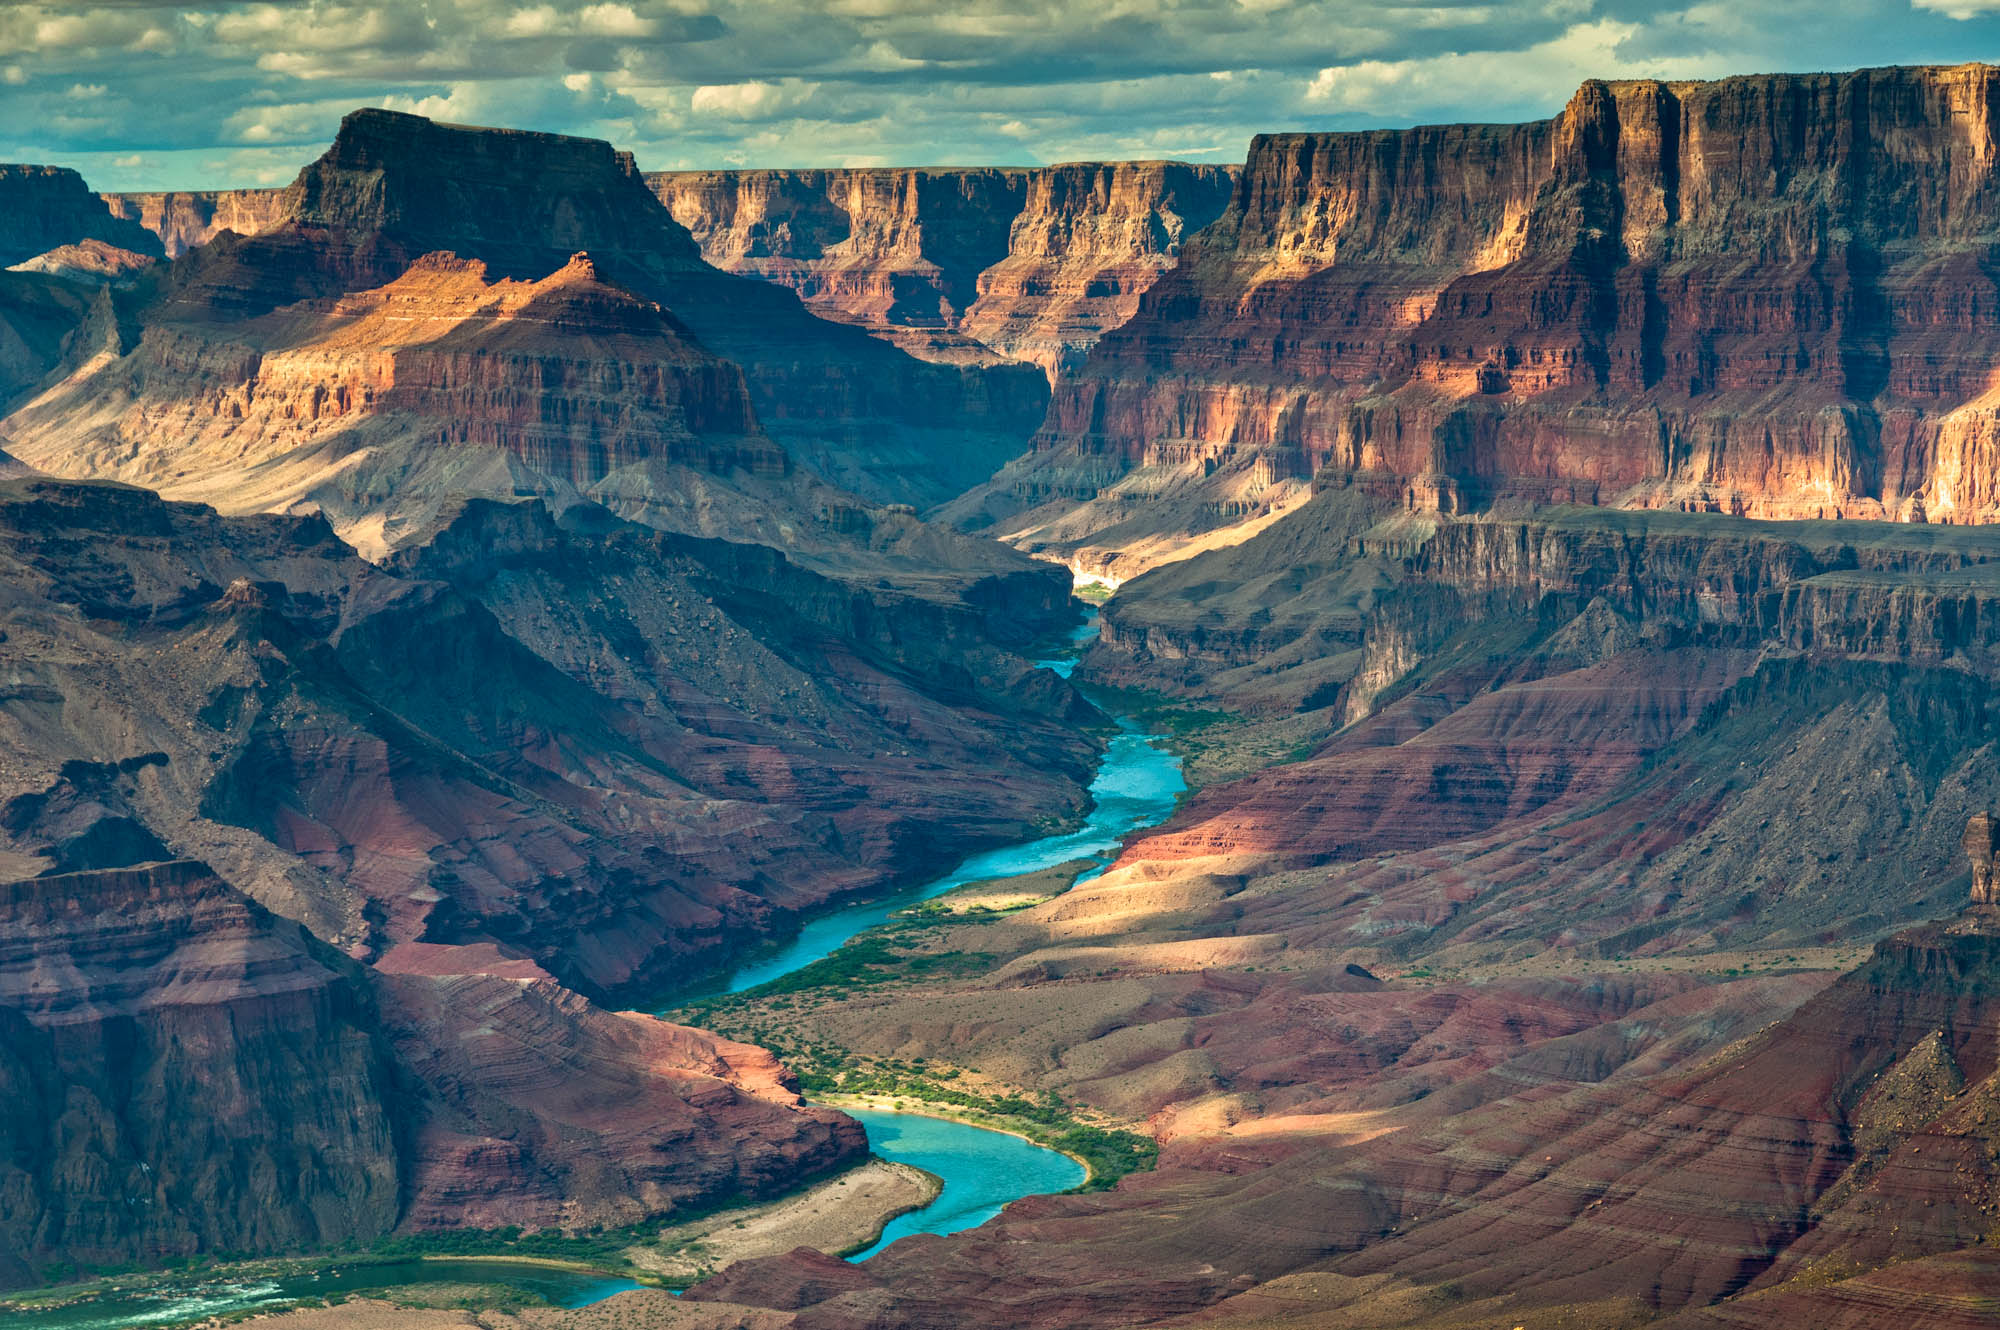  Powell, The Colorado River and The American West  River Culture